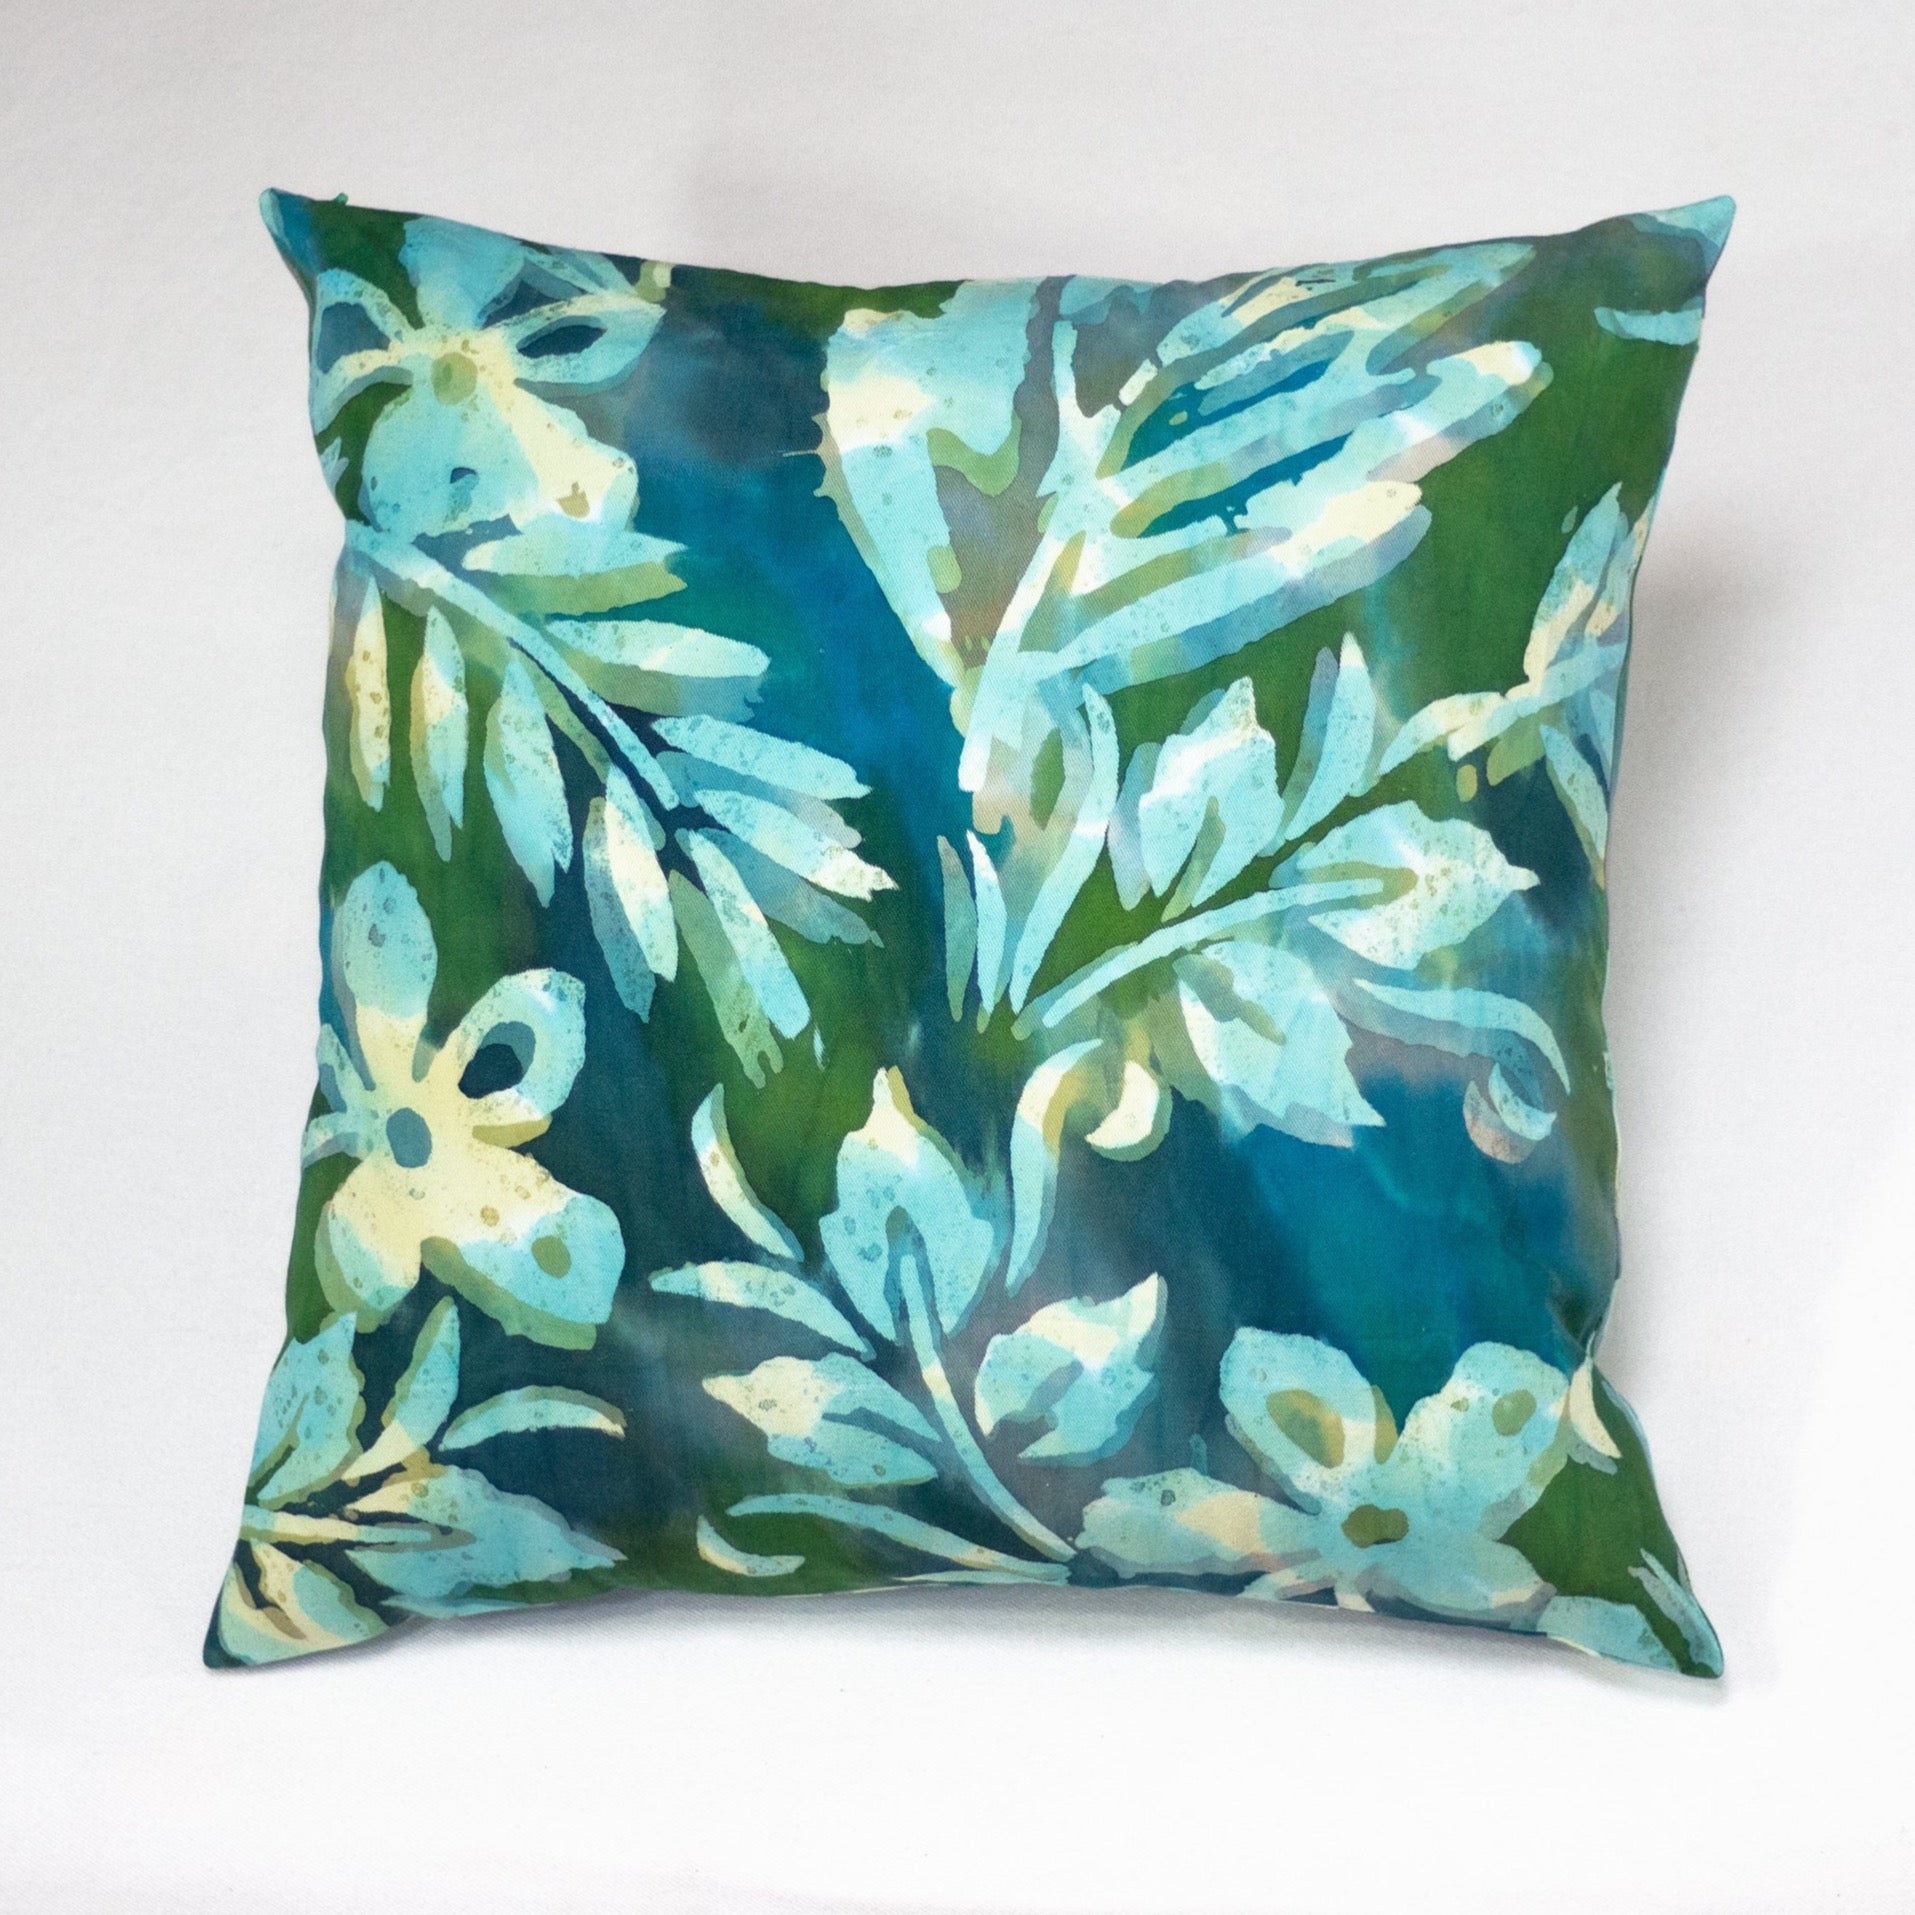 Hand Painted Accent Pillow Cover - Lilipond